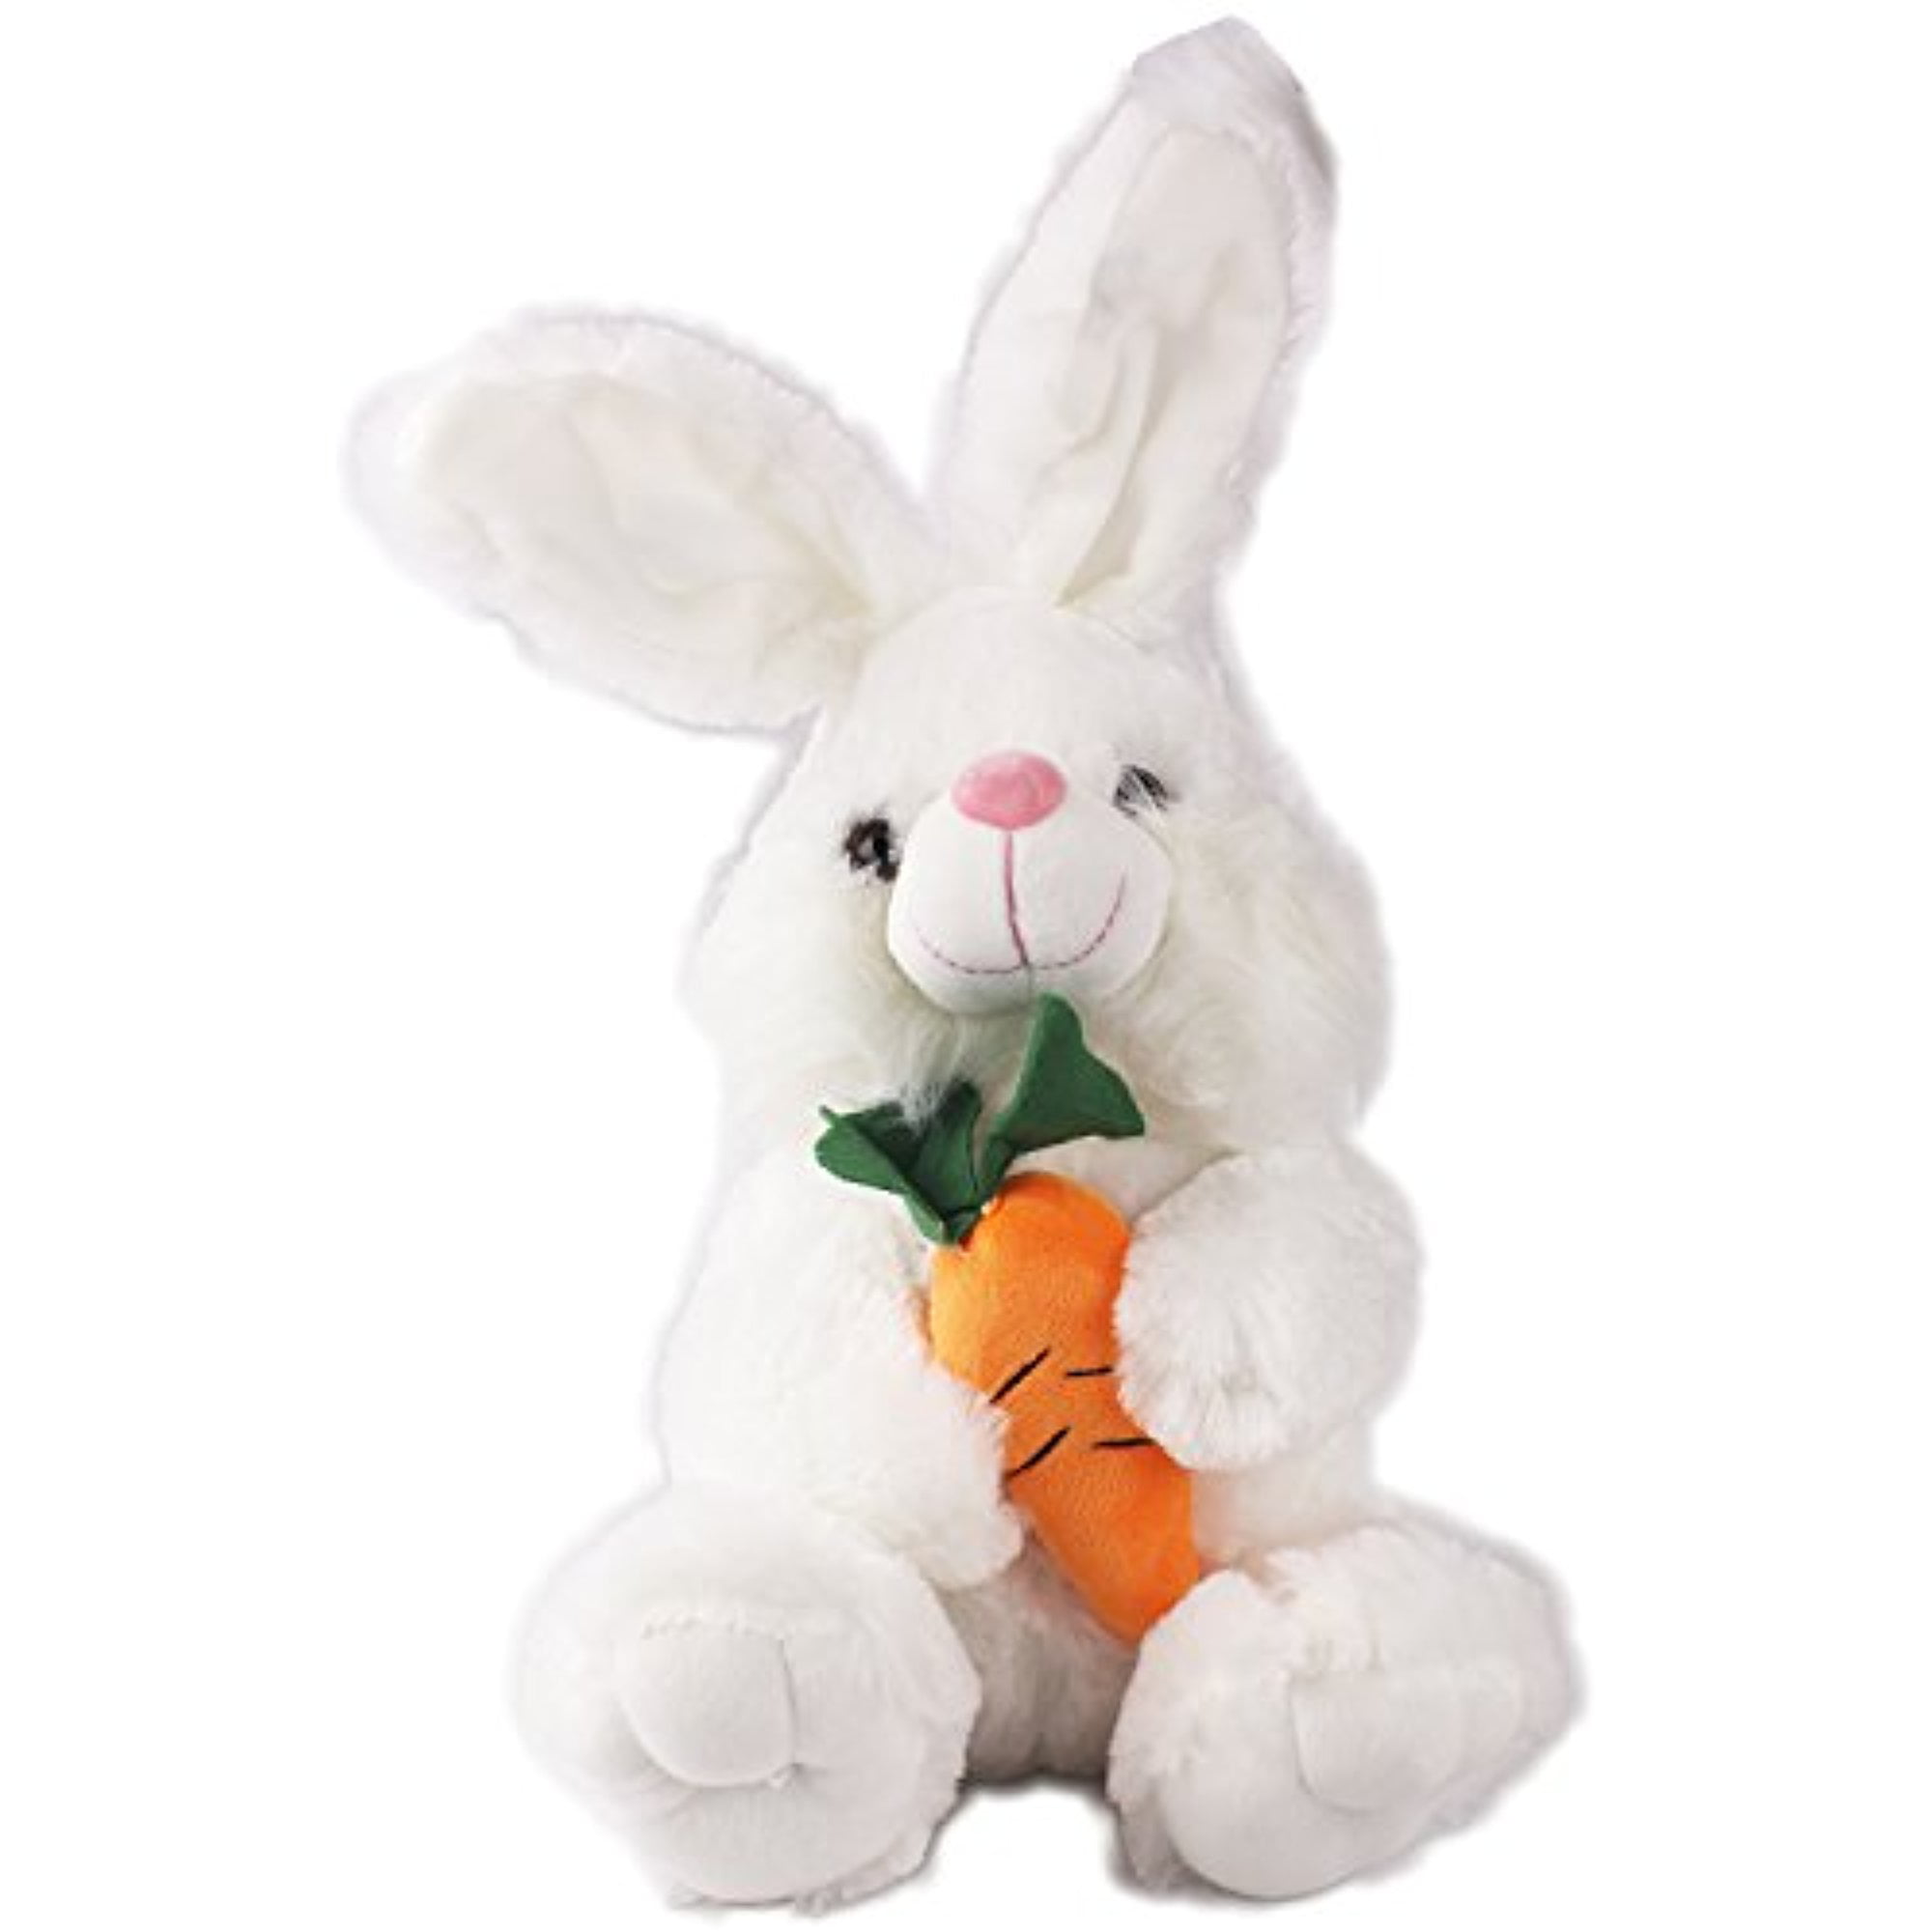 The Children’s Place White Bunny Rabbit w/ Carrot Plush Toy Doll NWT 